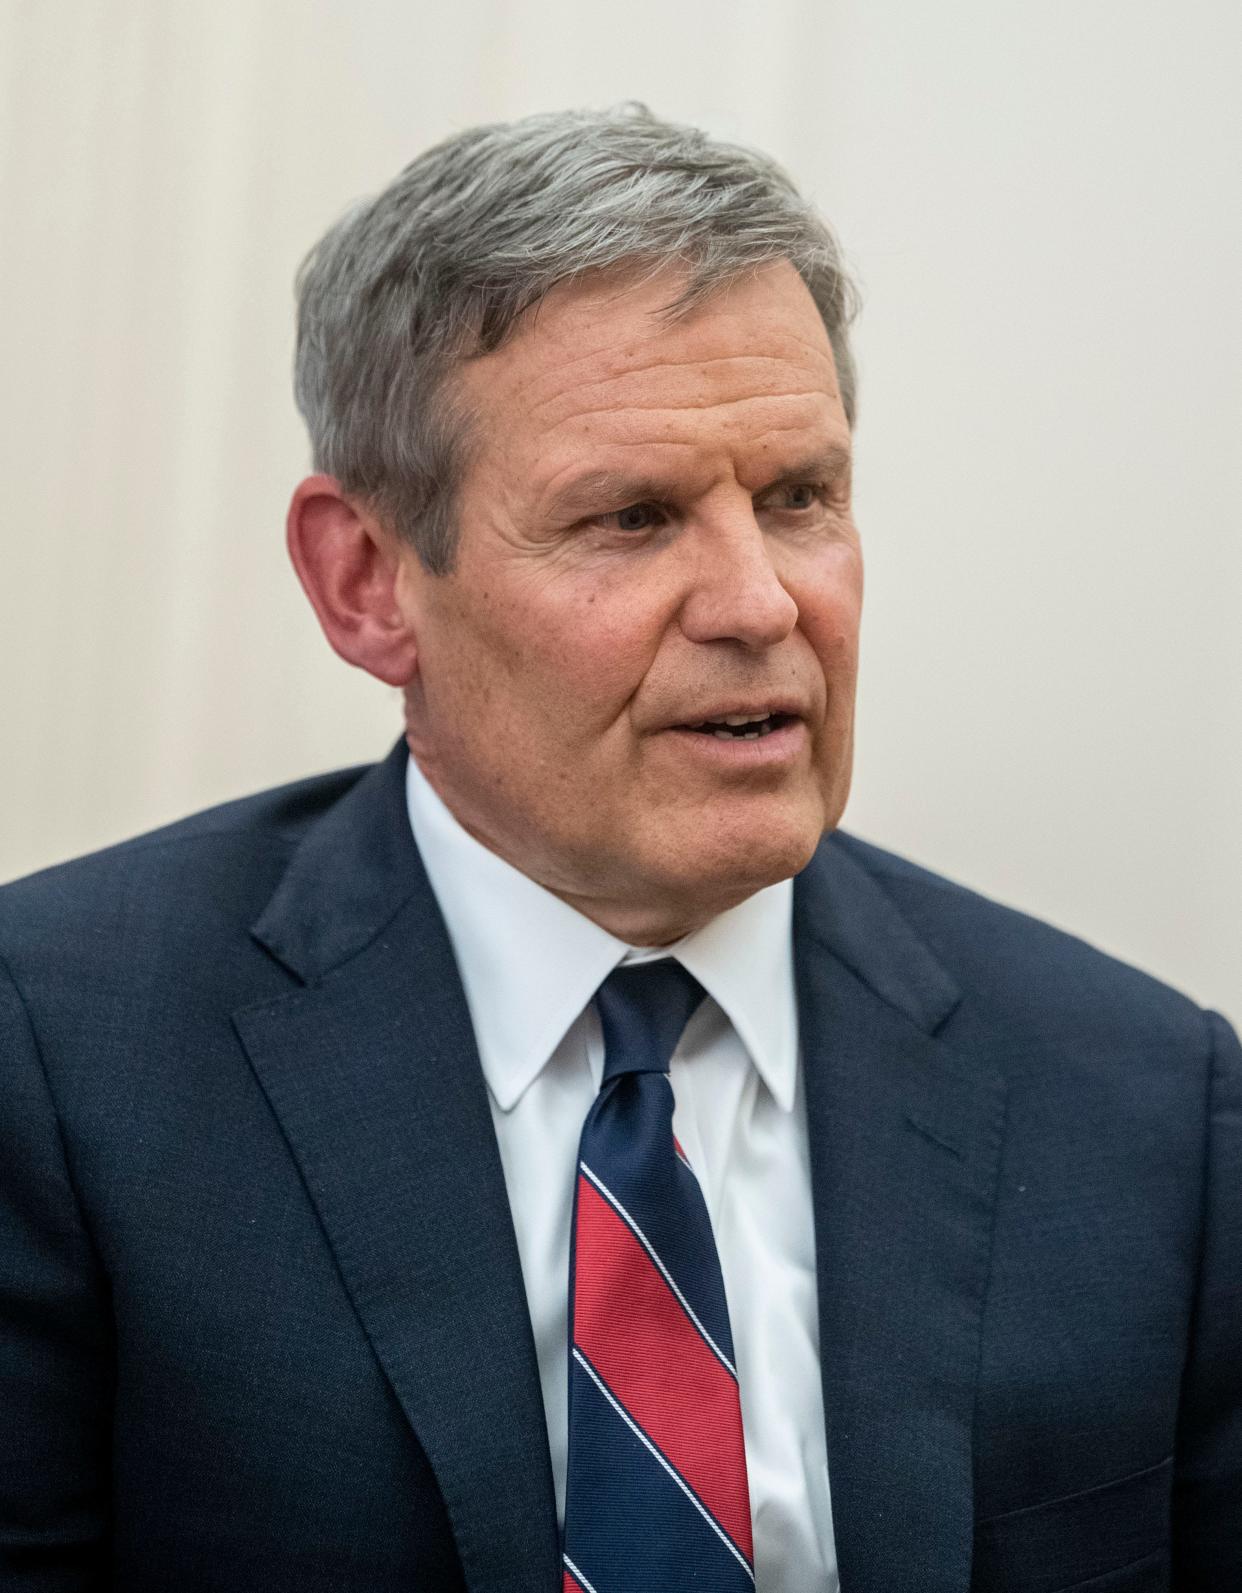 Gov. Bill Lee's new position with the Republican Governors Association could elevate him in the national eye before the 2024 election.